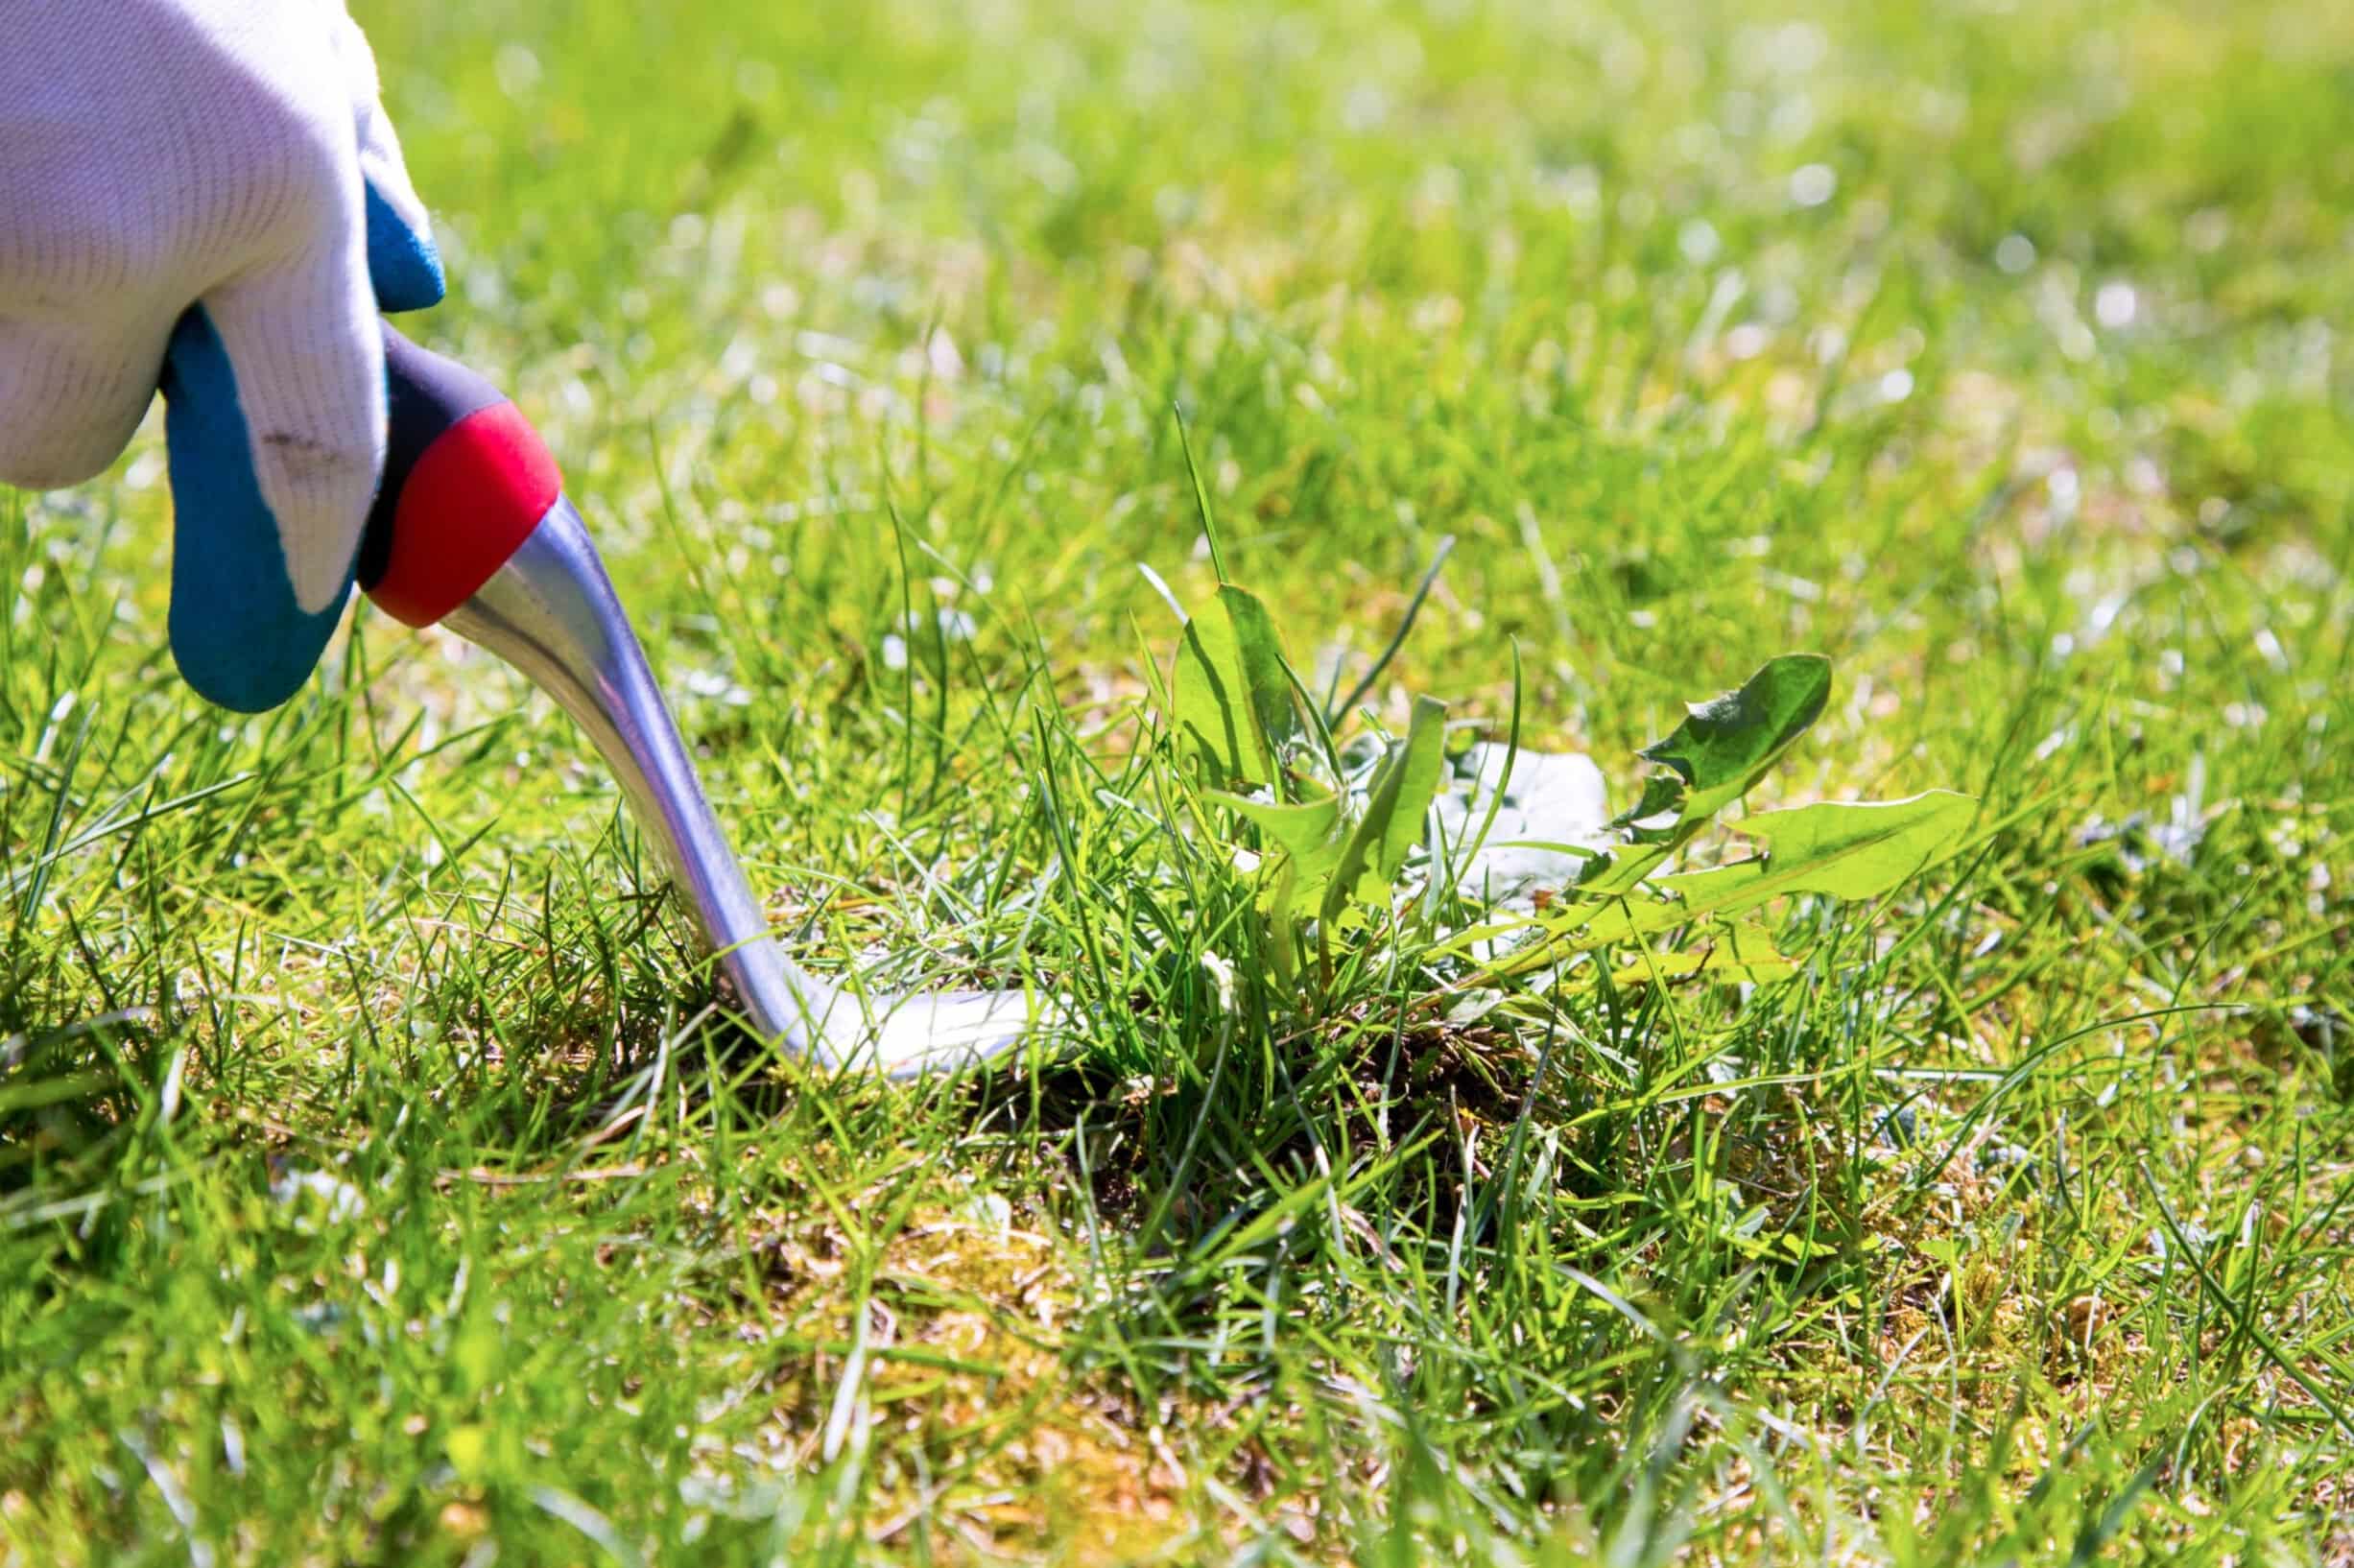 How To Kill Weeds In Yard Without Killing Grass